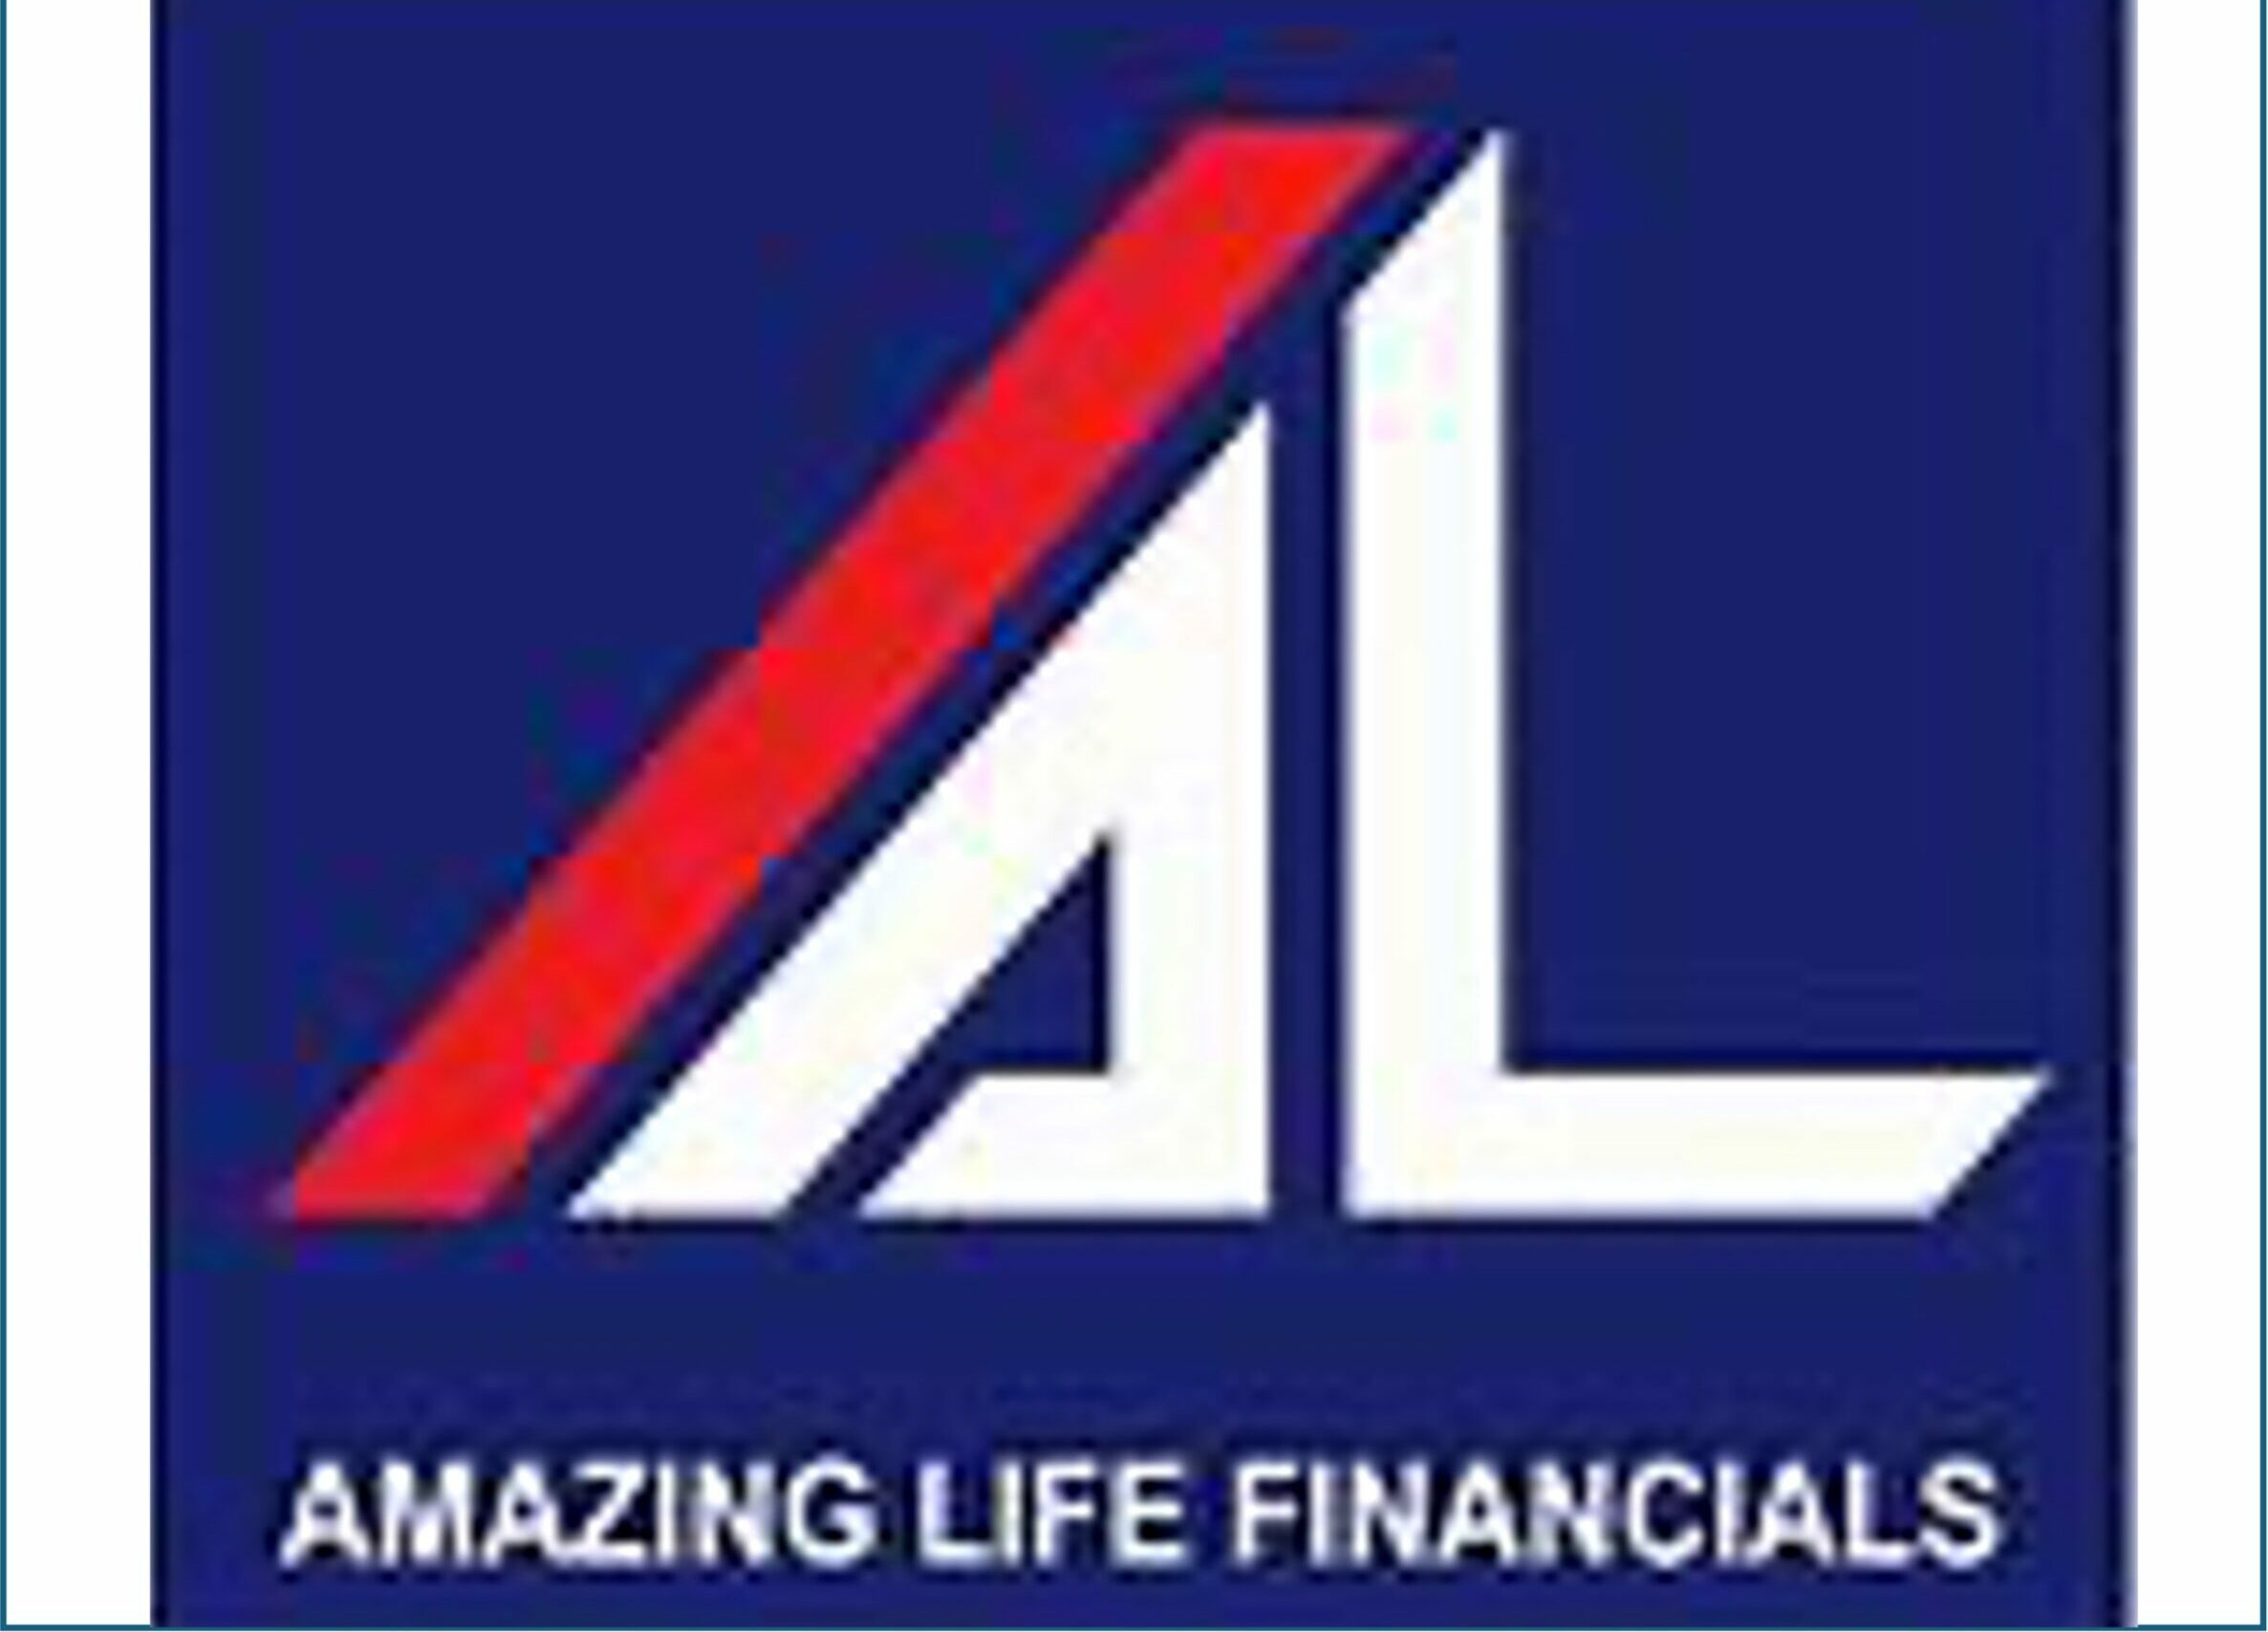 AMAZING LIFE FINANCIALS BRANCH is a Top Branch of AXA with more than 22 years of solid experience. It is tagged as the Home of MDRTs. It develops individuals to be professionals in providing the right financial advice to different stages/situations of our customers.